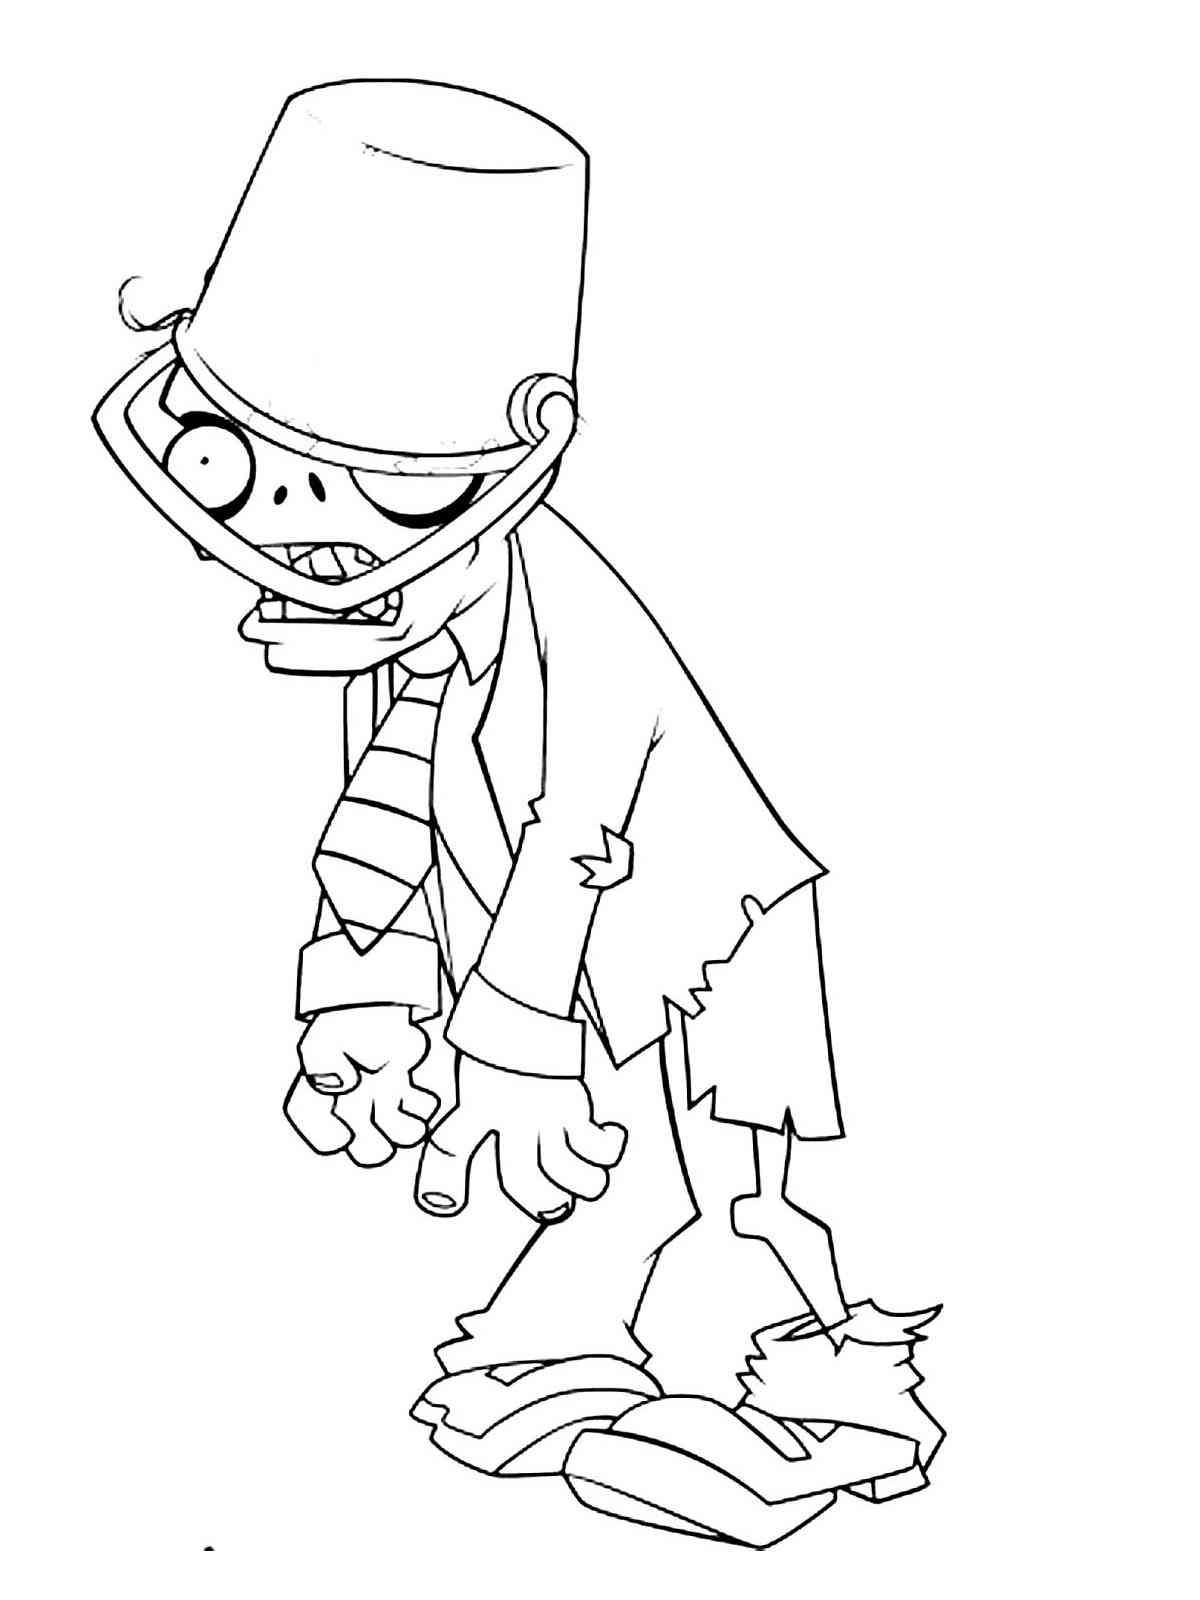 Buckethead Zombie from PvZ coloring page